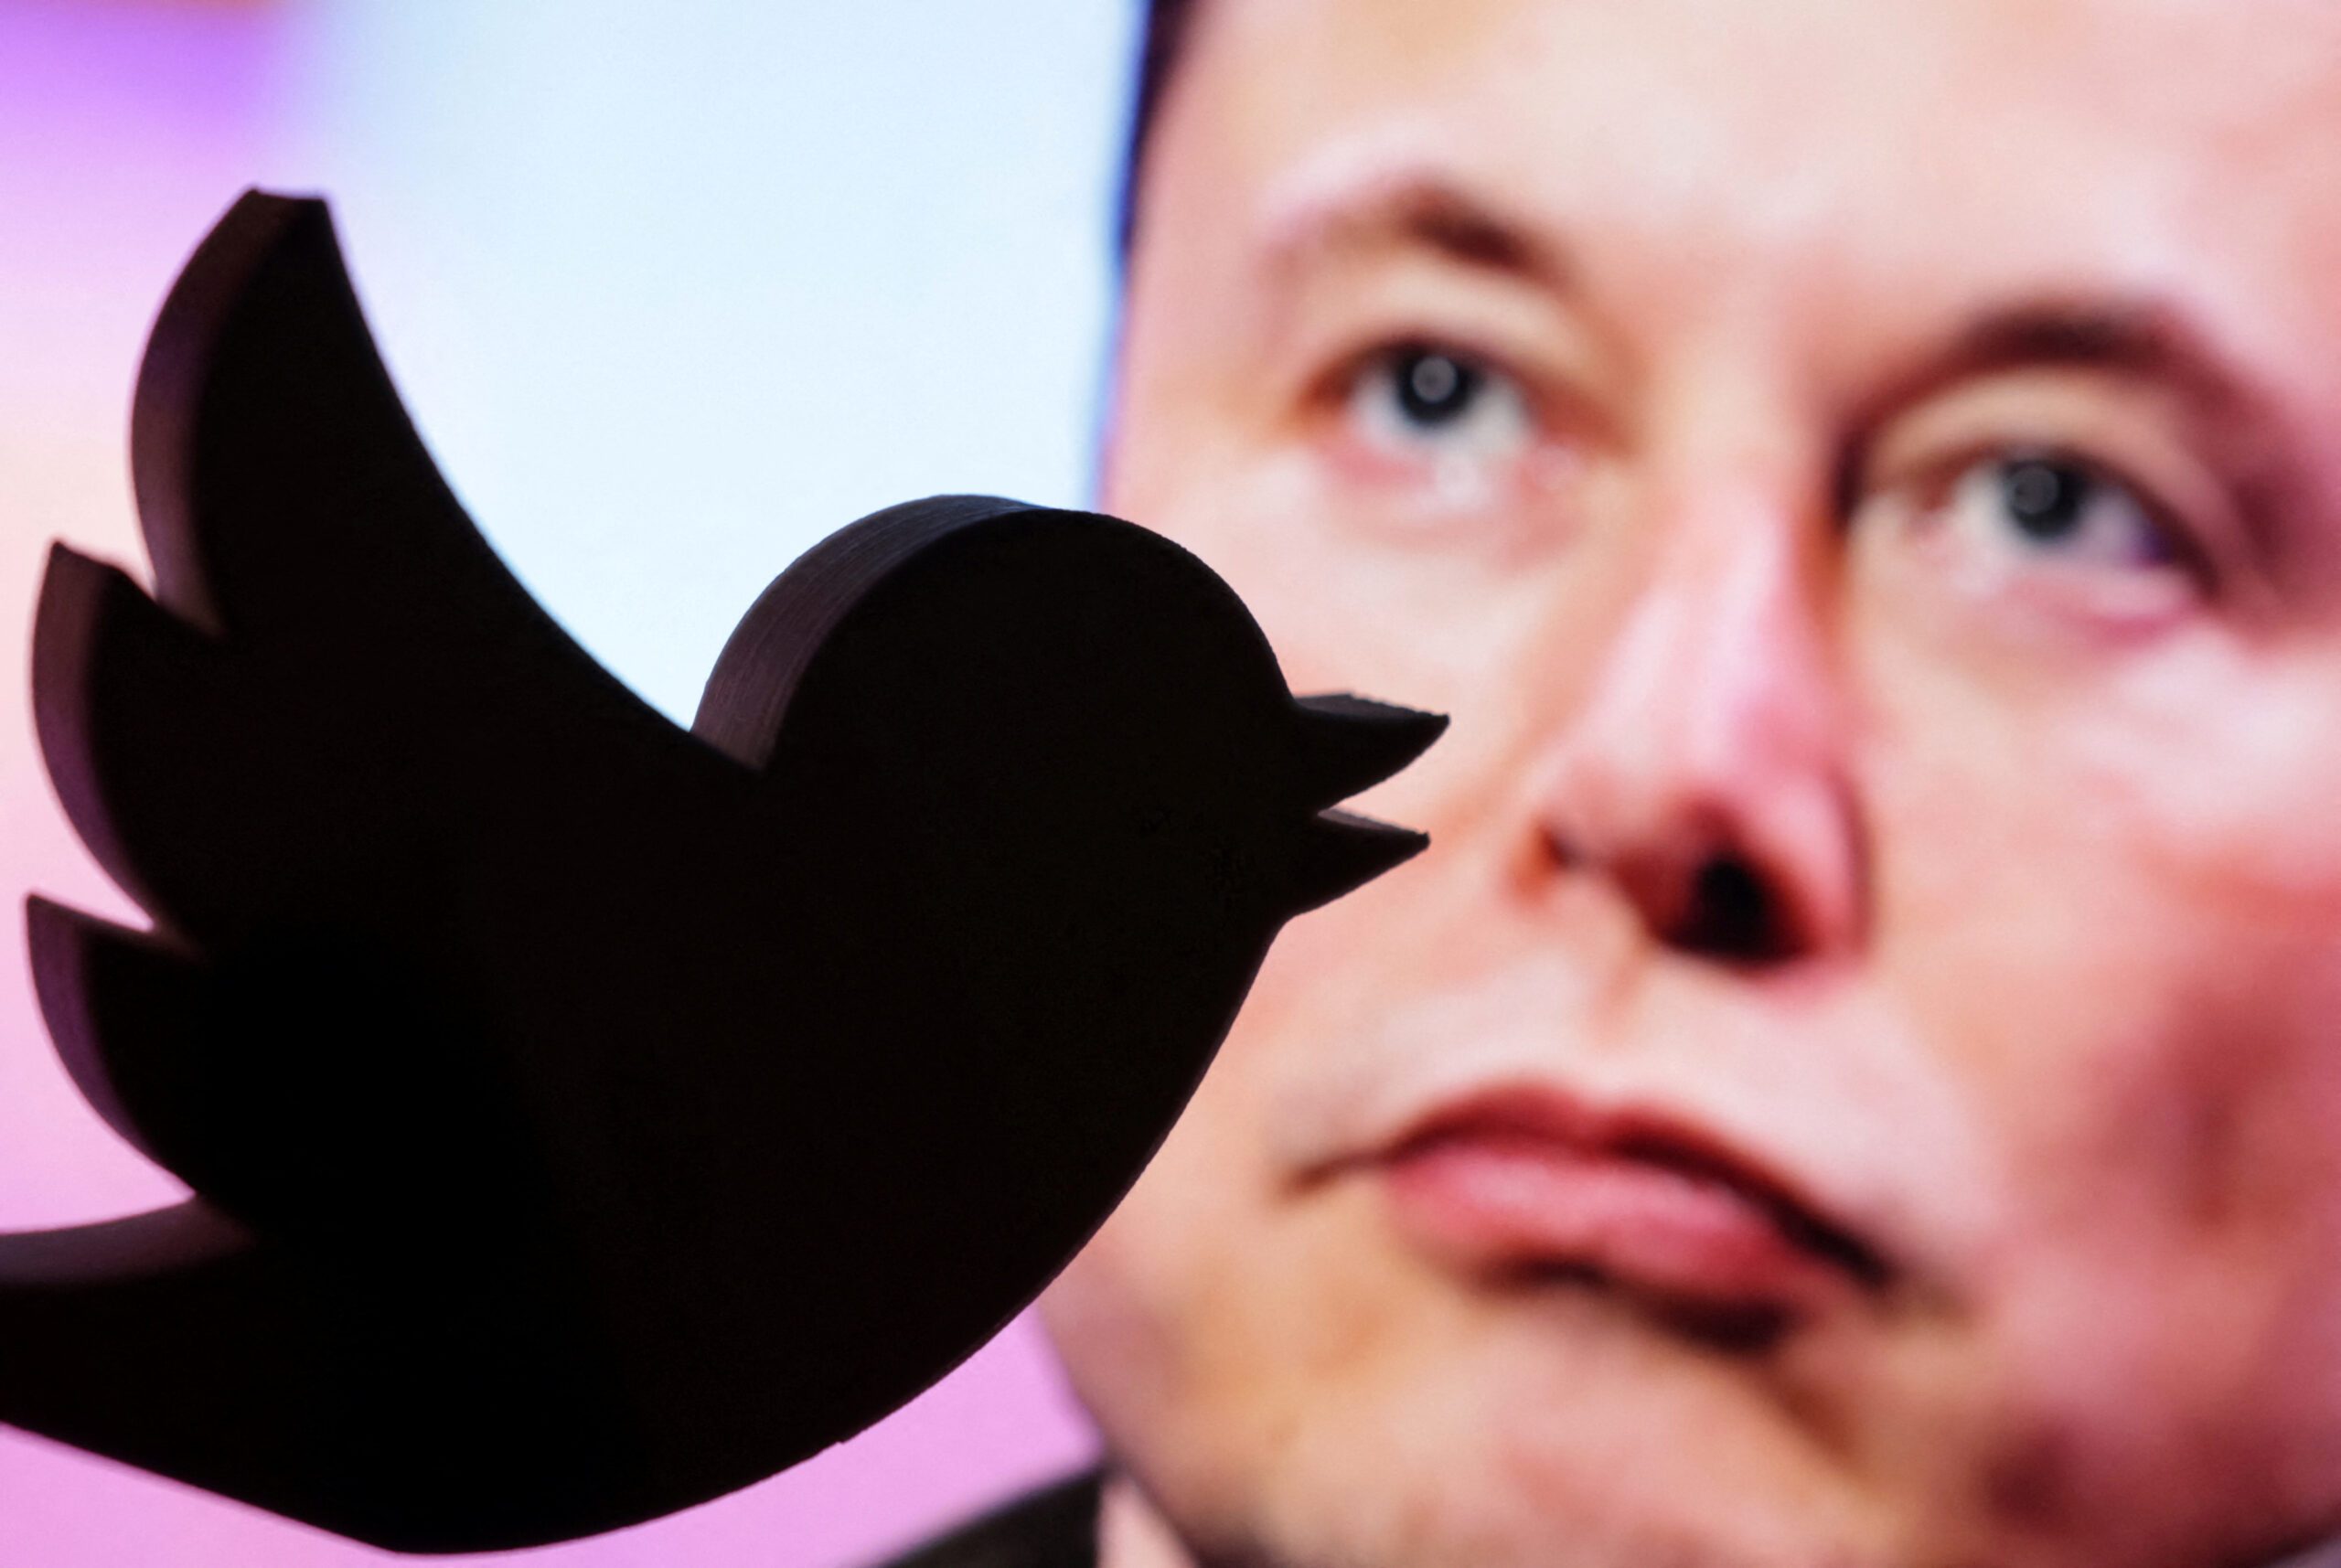 Elon Musk says Twitter verification to cost $8 per month